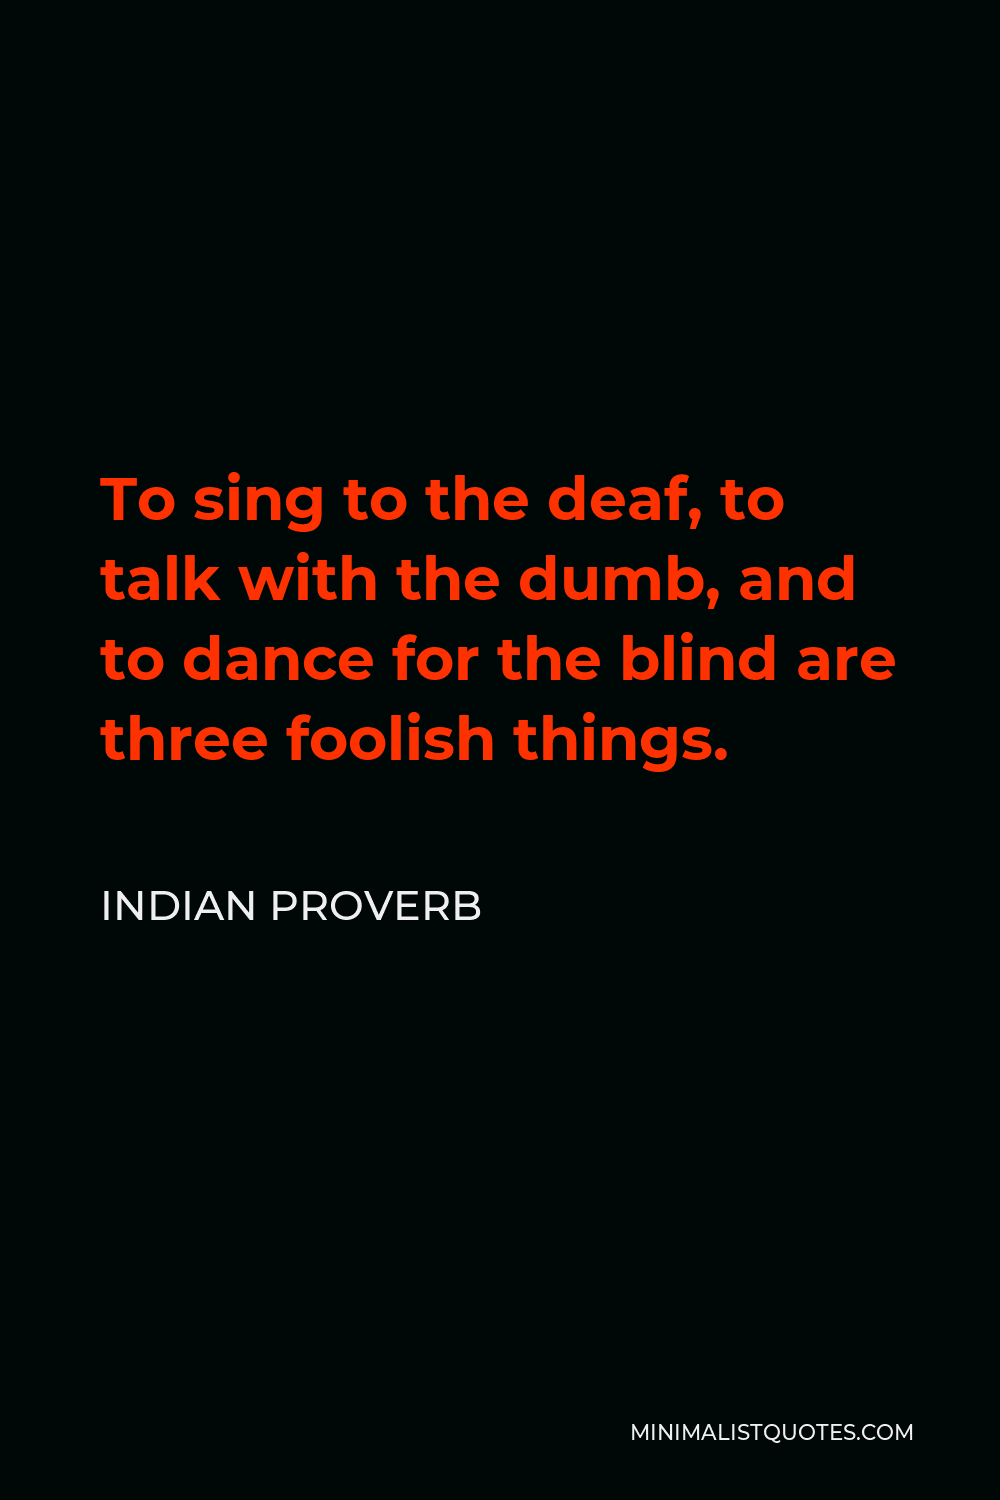 Indian Proverb Quote - To sing to the deaf, to talk with the dumb, and to dance for the blind are three foolish things.